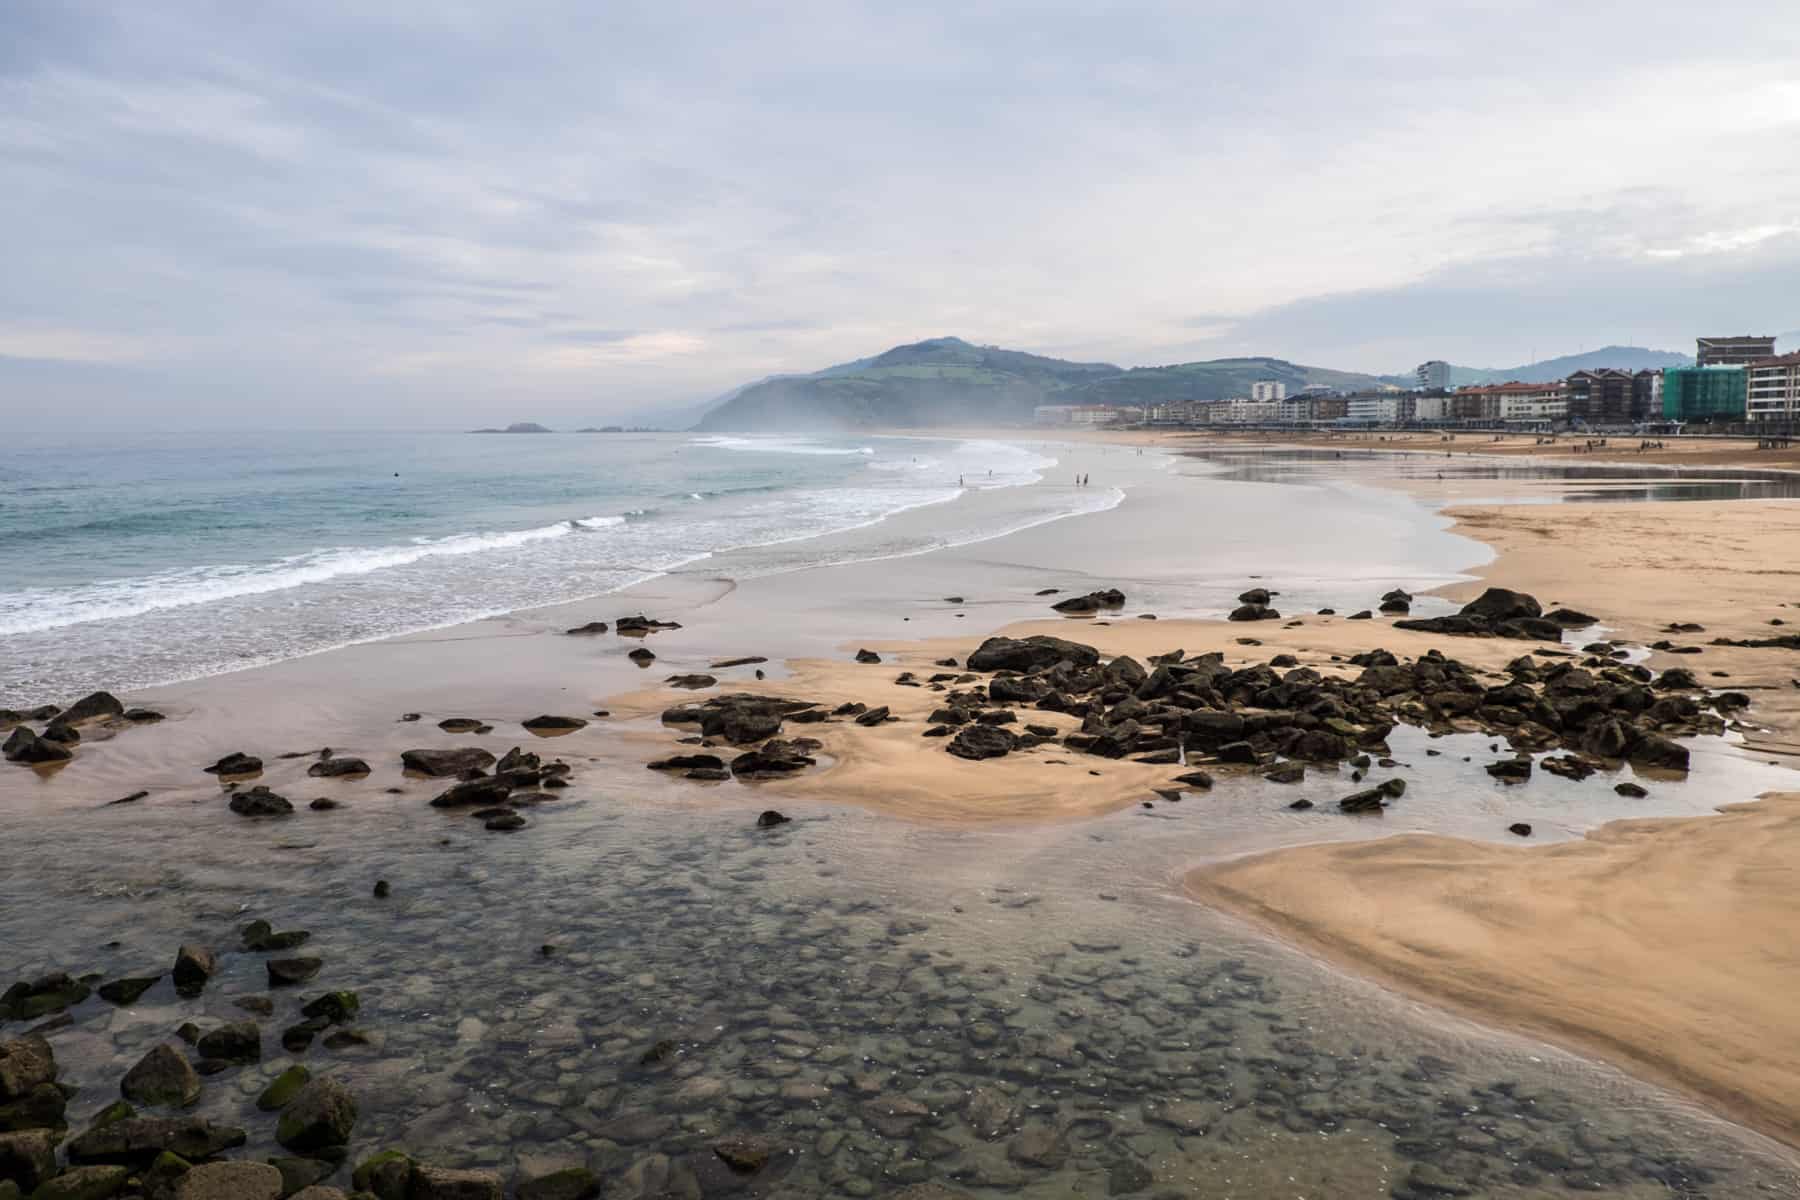 White waves from a light blue sea flow towards a rock strewn golden sand beach in San Sebastian, Spain. A gathering of buildings can be seen in the distance at the end of the beach towards the mountains. 